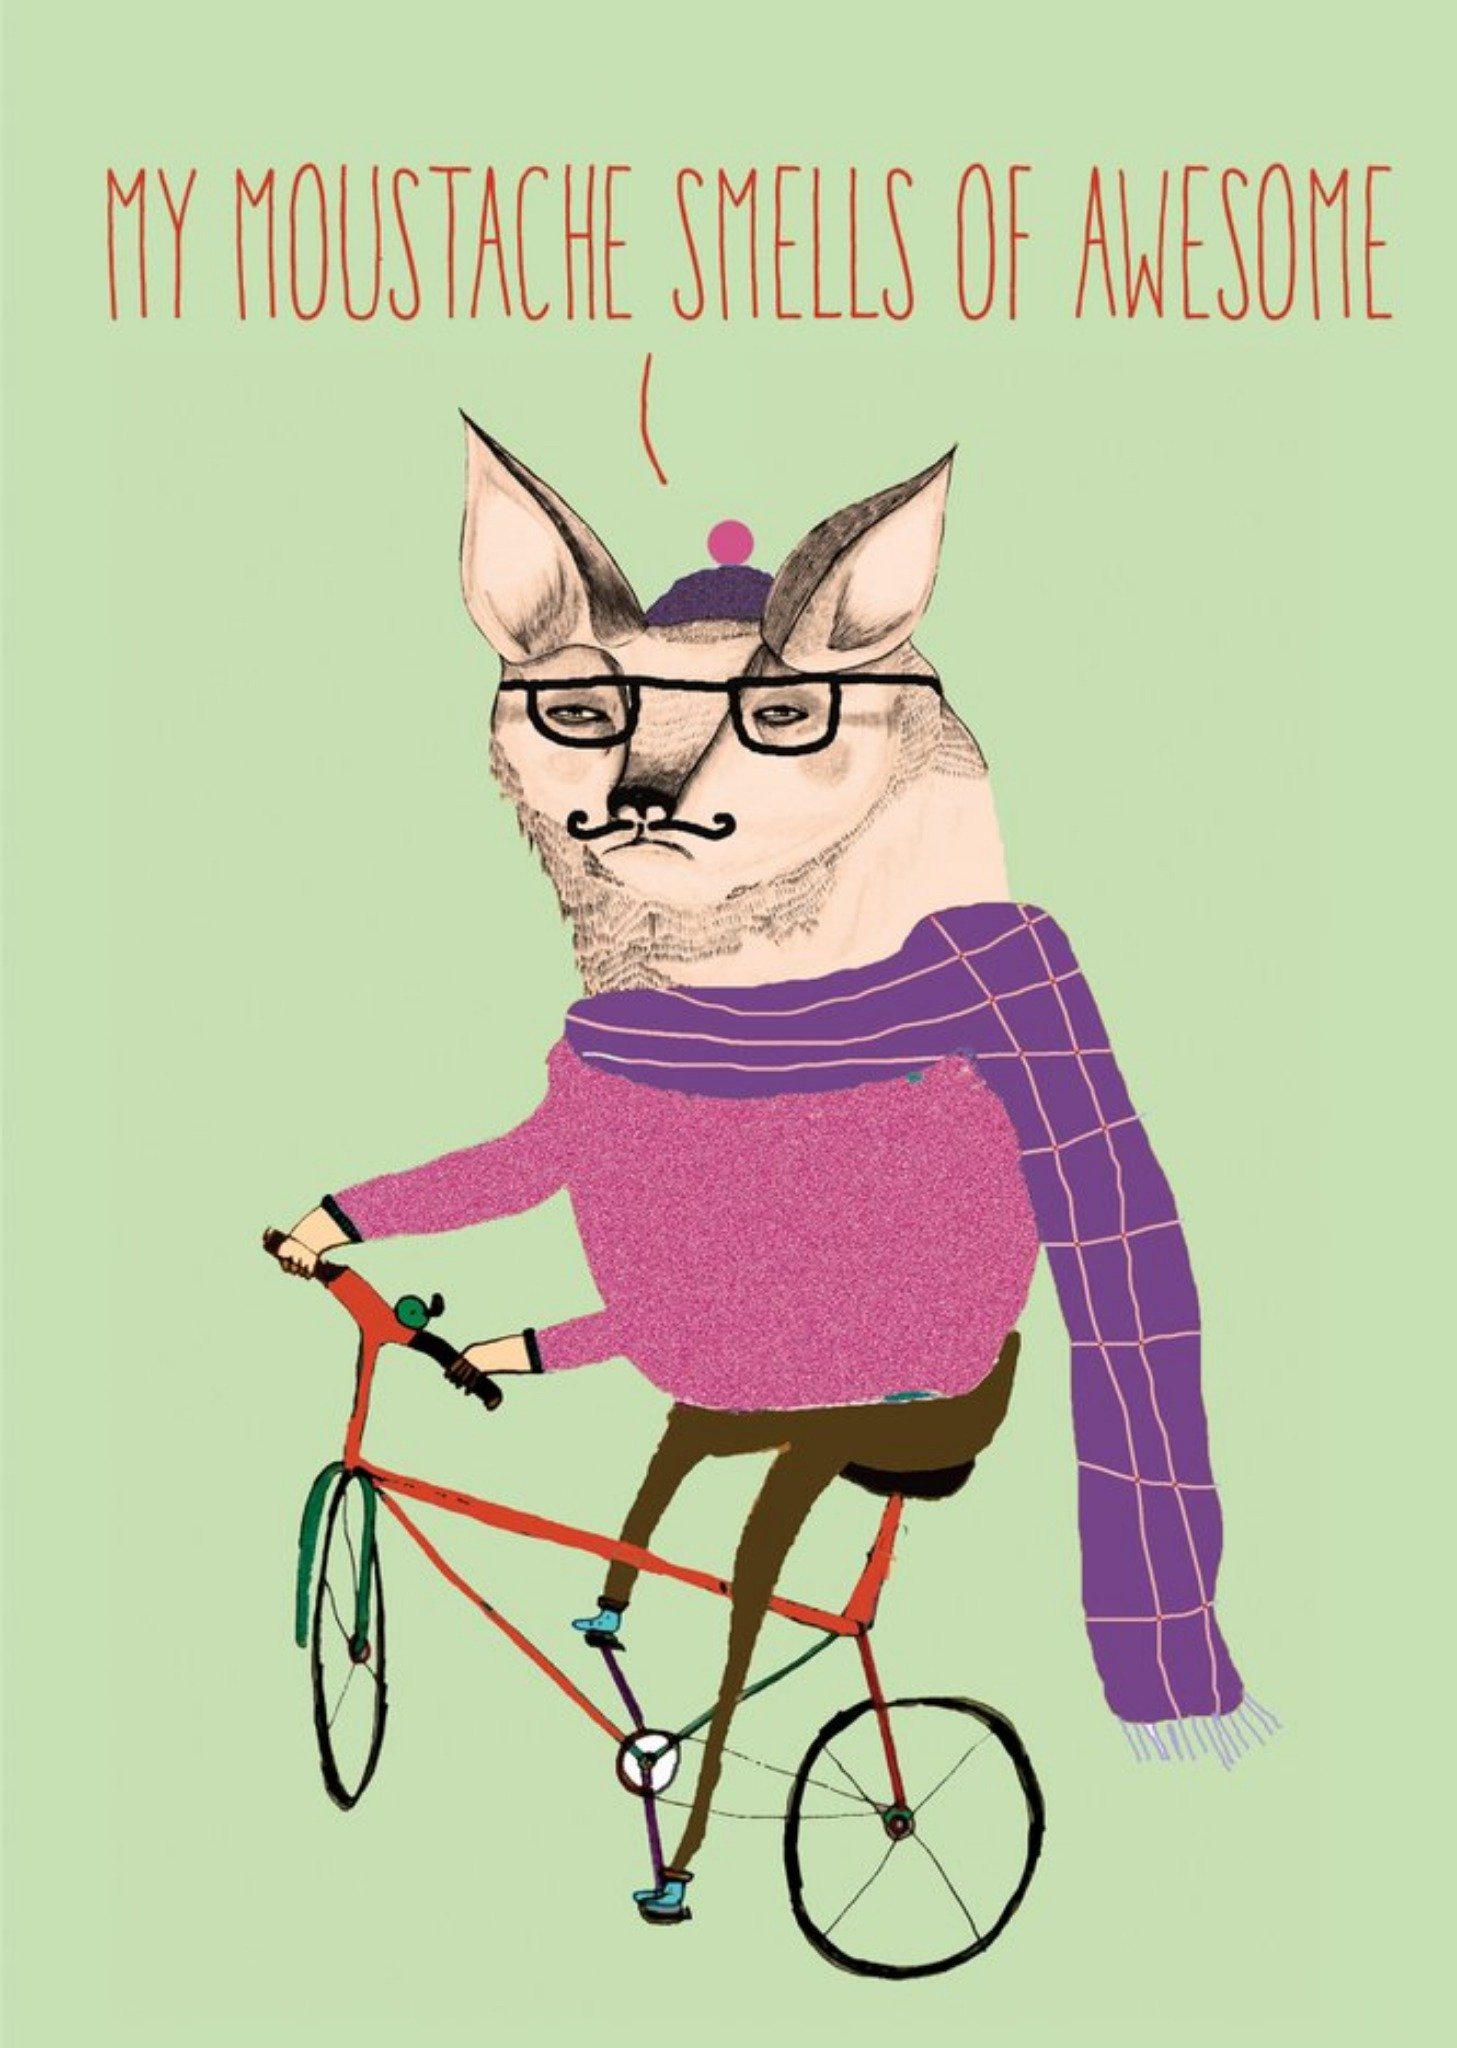 Brainbox Candy Funny Fox Riding Bike Moustache Smells Of Awesome Card, Large